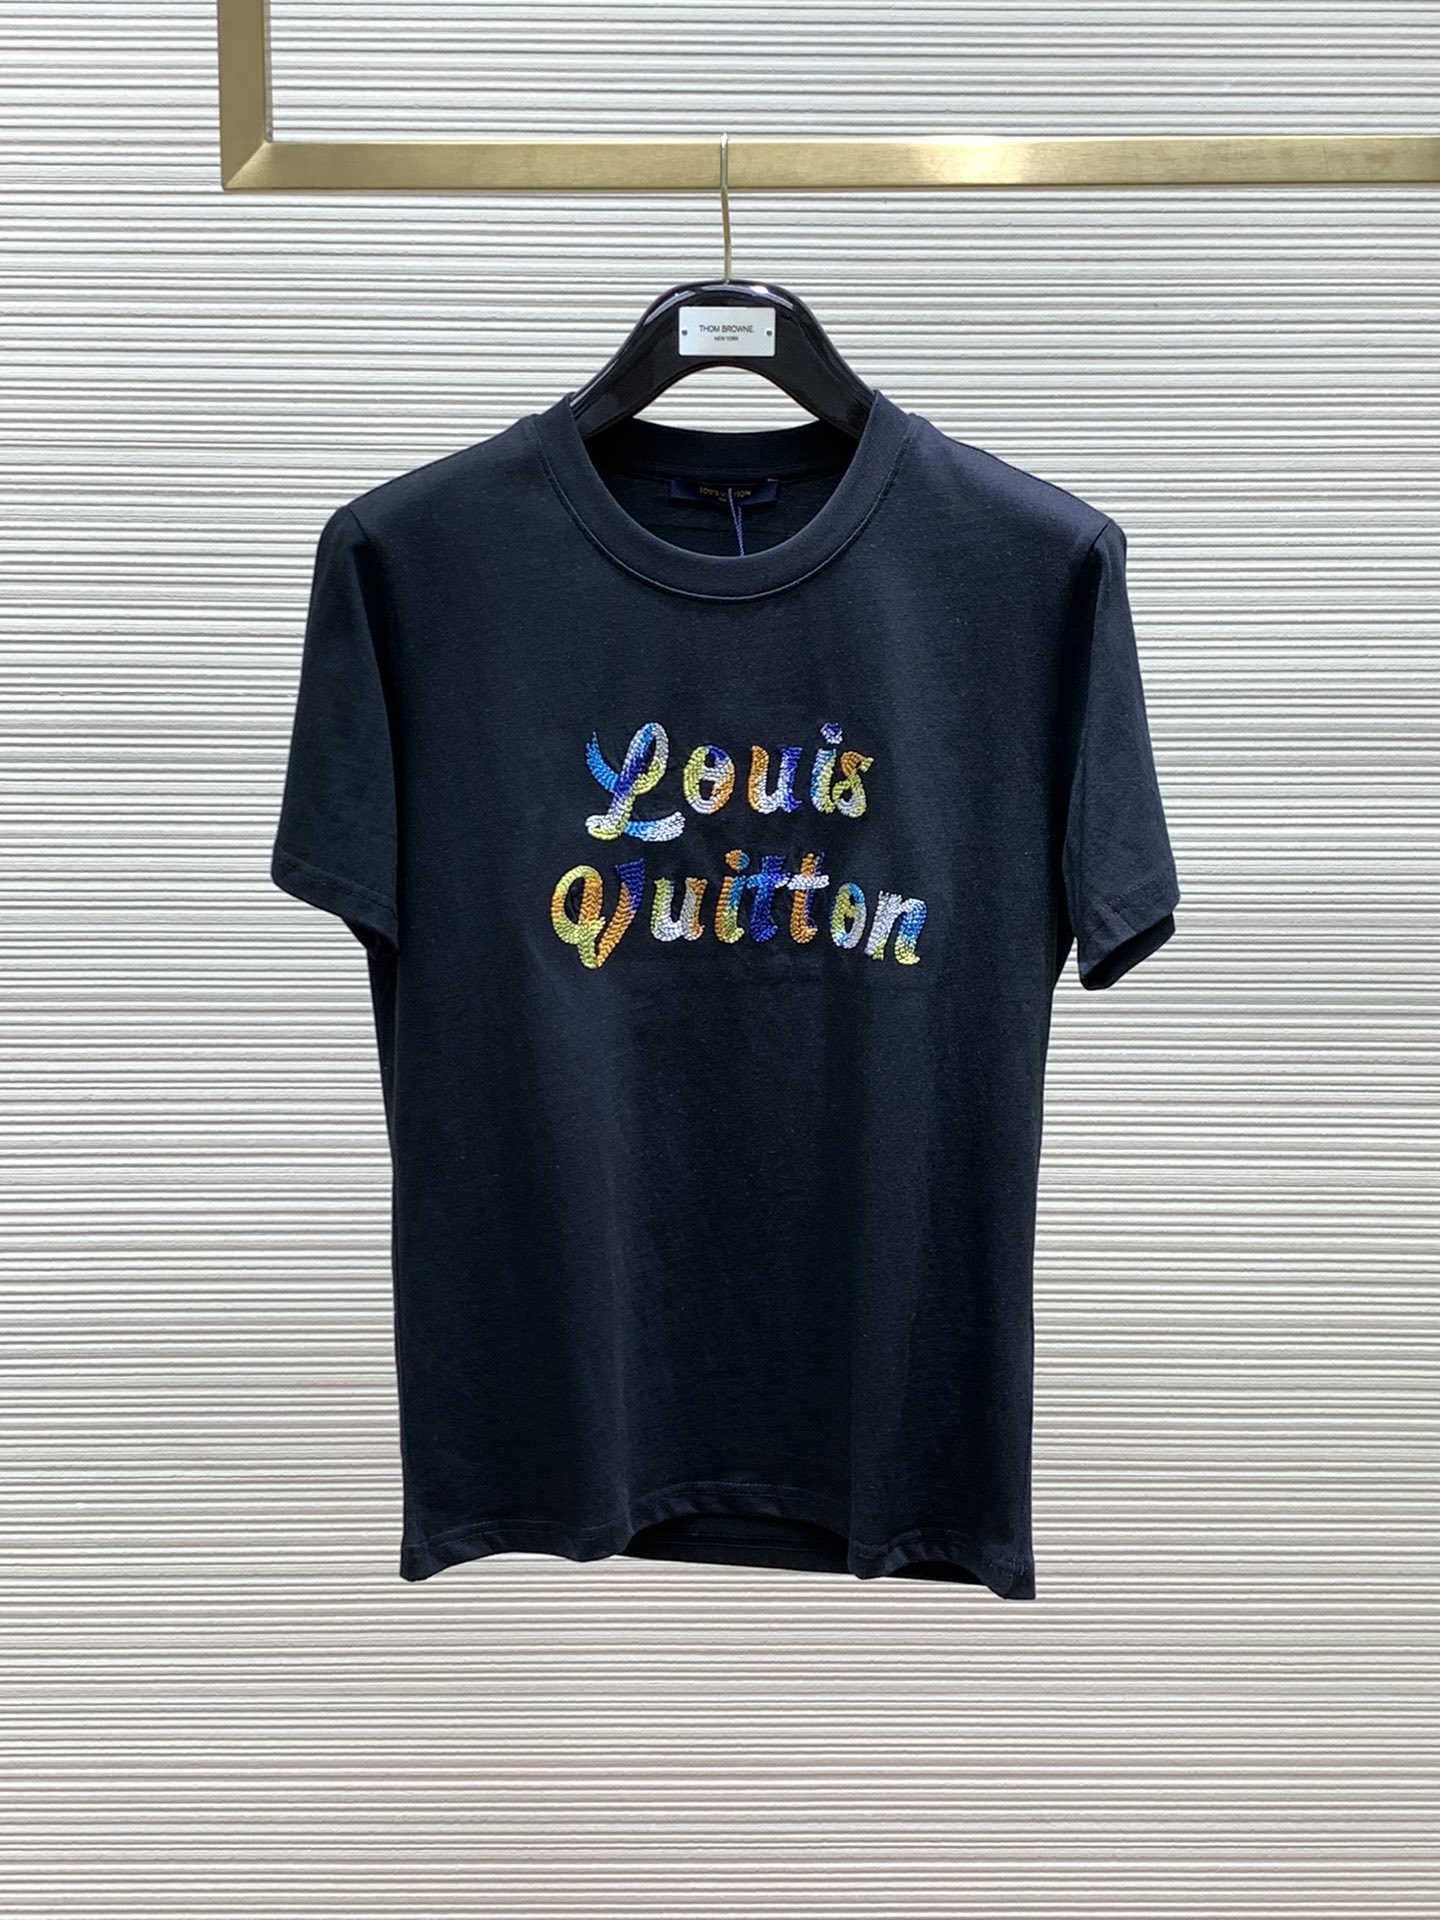 Louis Vuitton Clothing T-Shirt Embroidery Summer Collection Fashion Short Sleeve